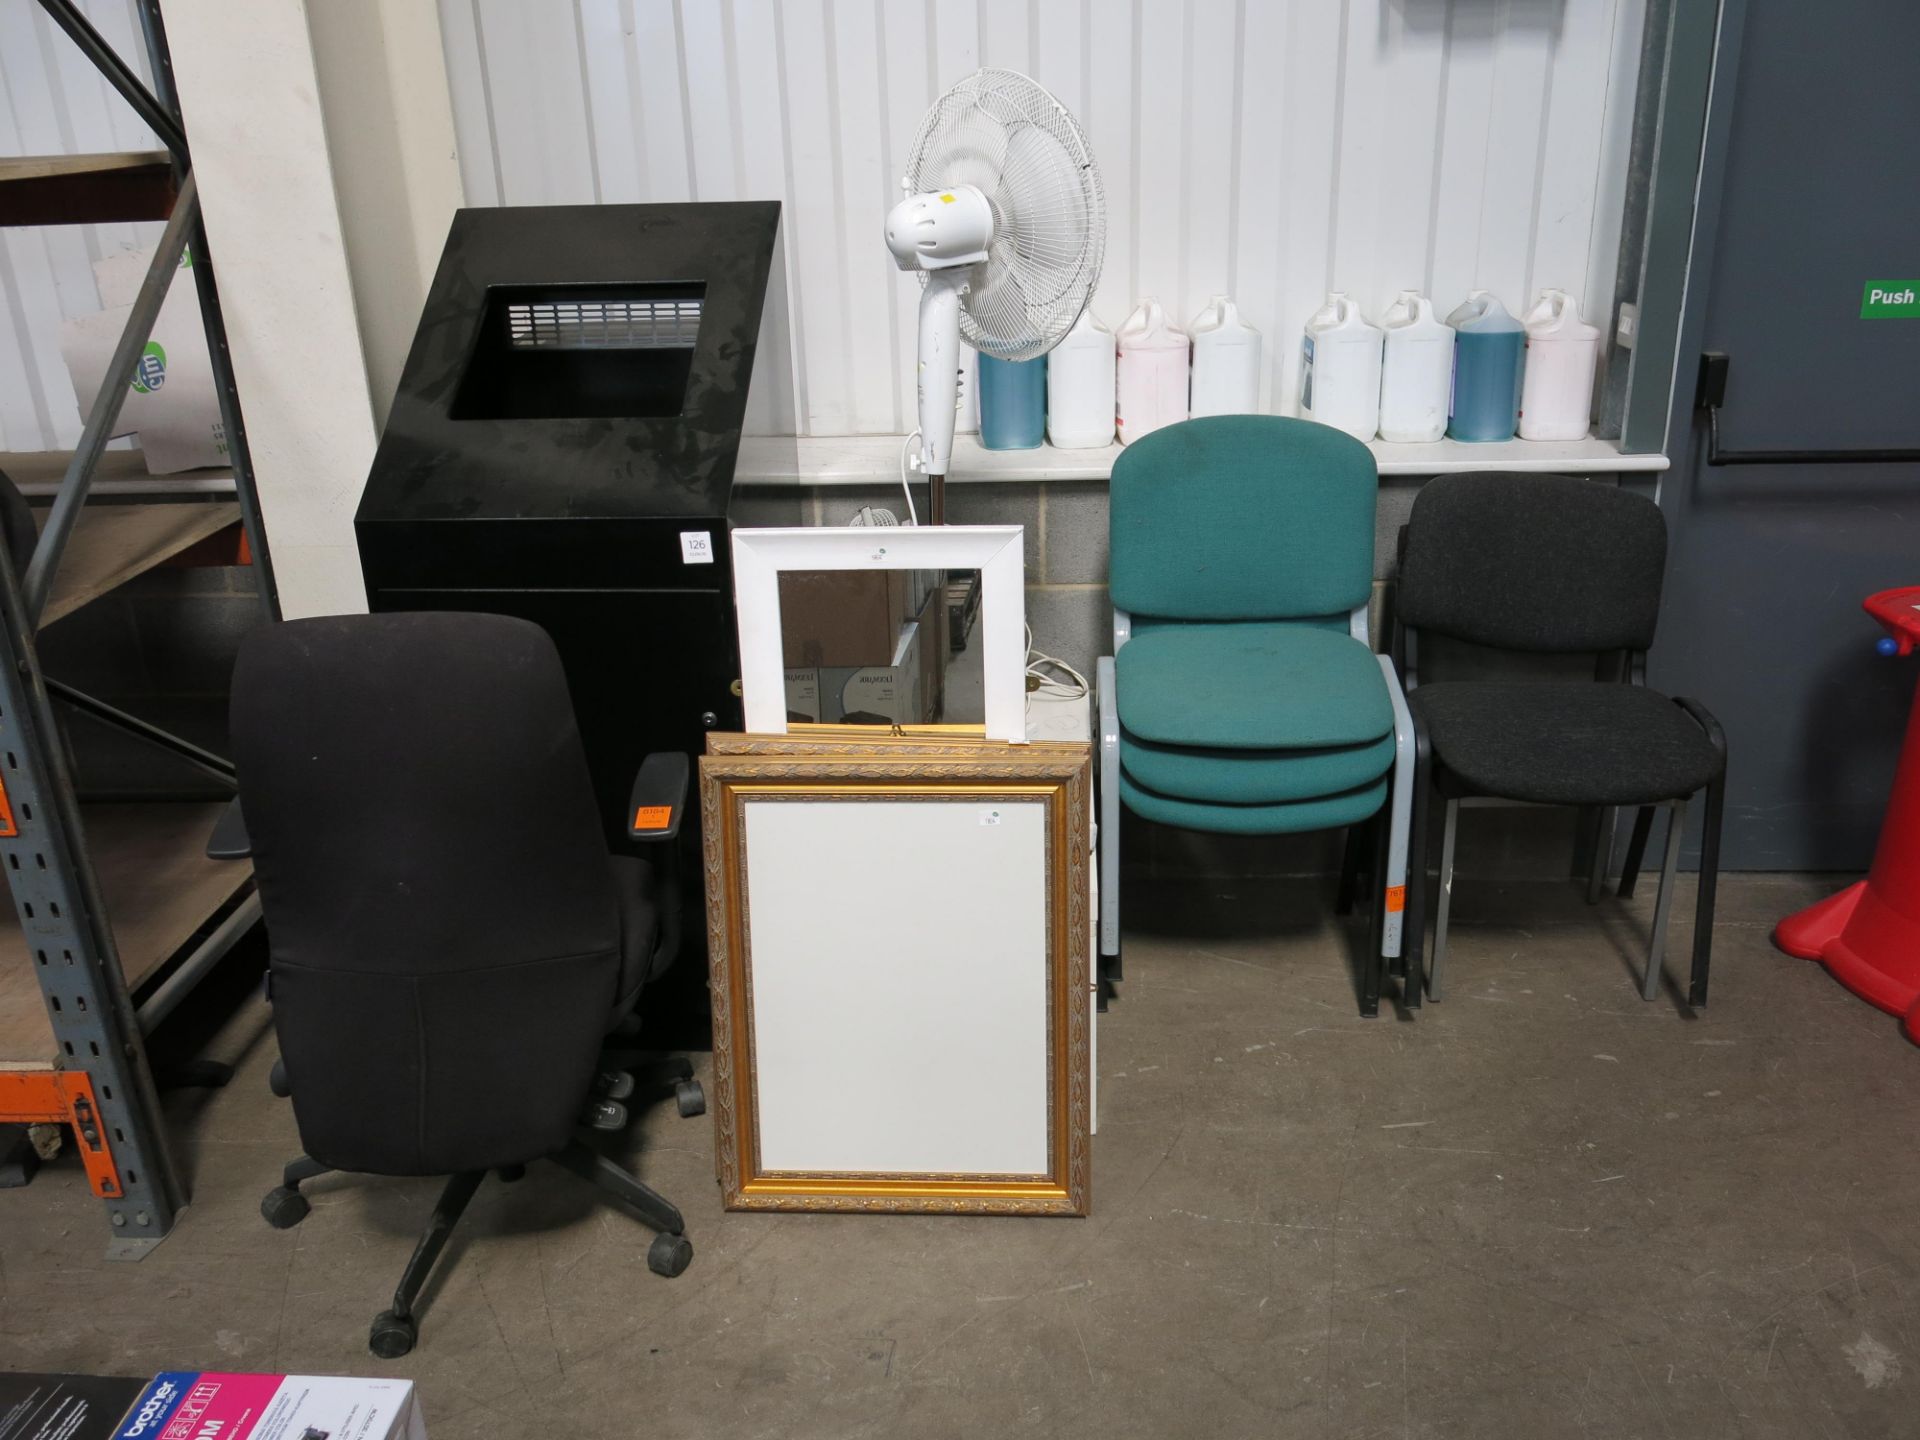 * 3 x Green & 1 brown meeting room chairs, 1 small table, 2 x fans & a display touch screen/TV unit